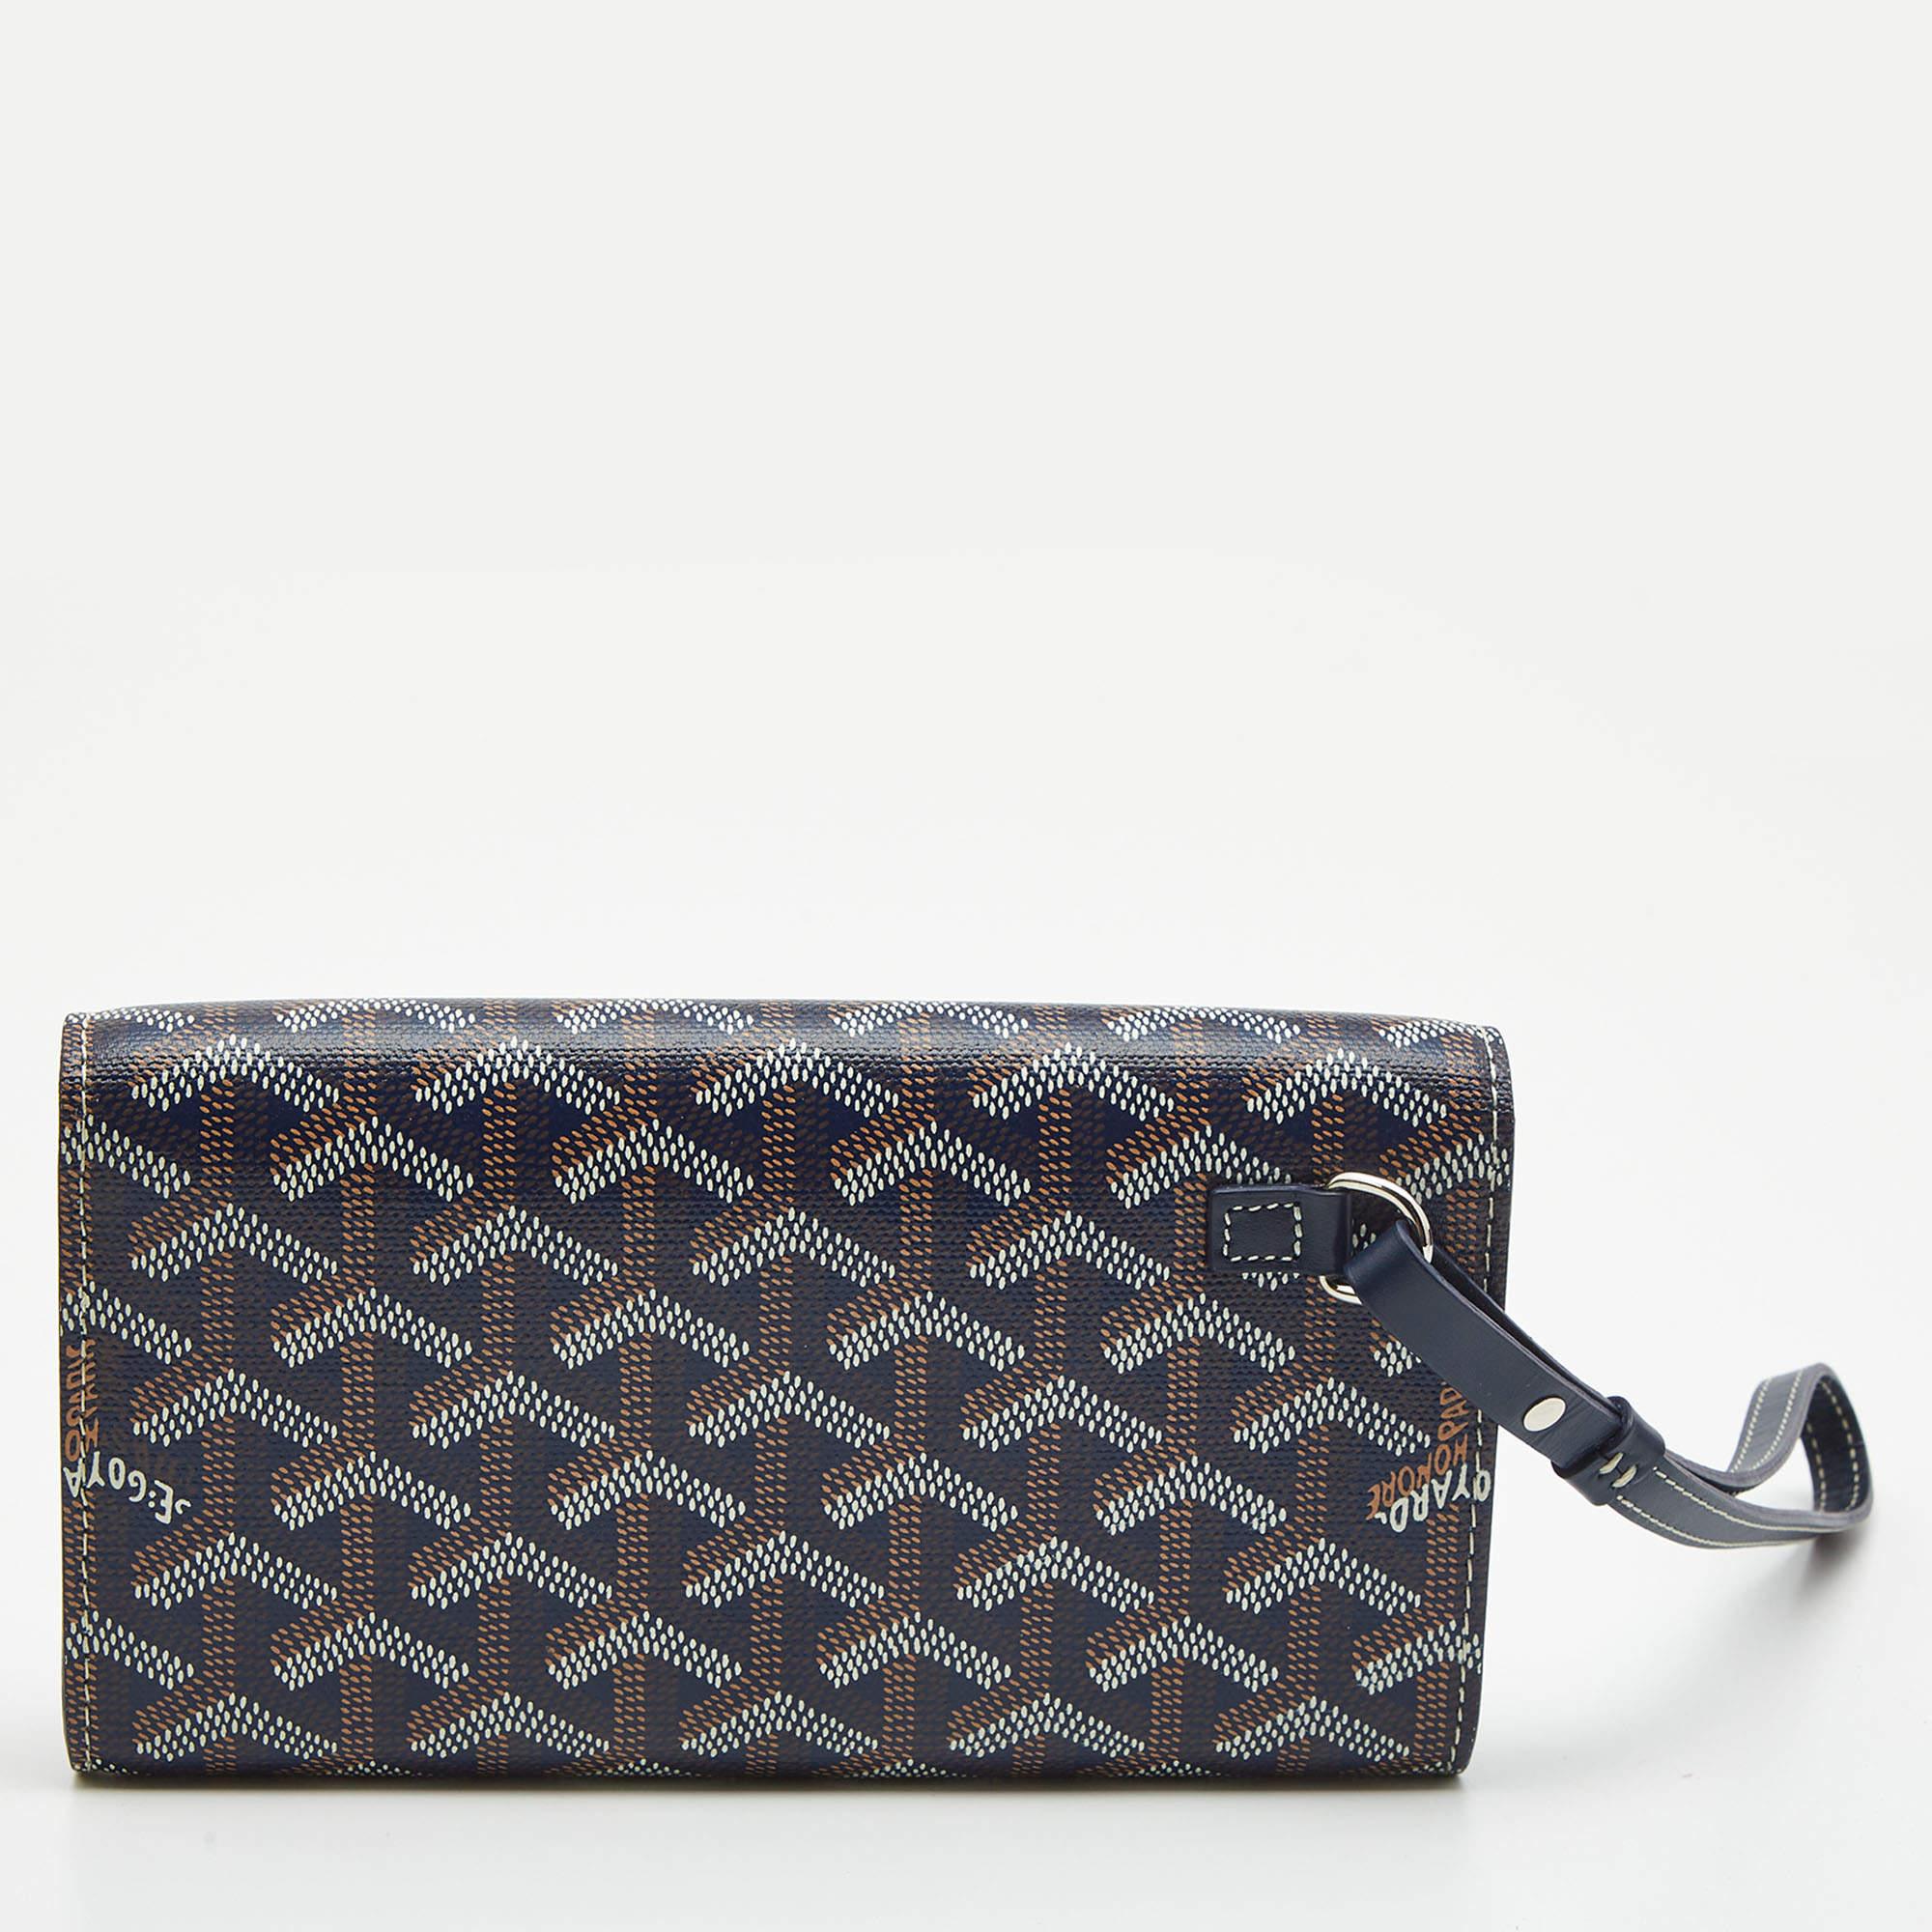 Luxuriously crafted by the experts at Goyard, this Monte Carlo phone case is a must-have accessory for fashion lovers. Crafted in Goyardine-coated canvas and leather, this case carries a sleek silhouette with a wood trim and silver-tone studs on the